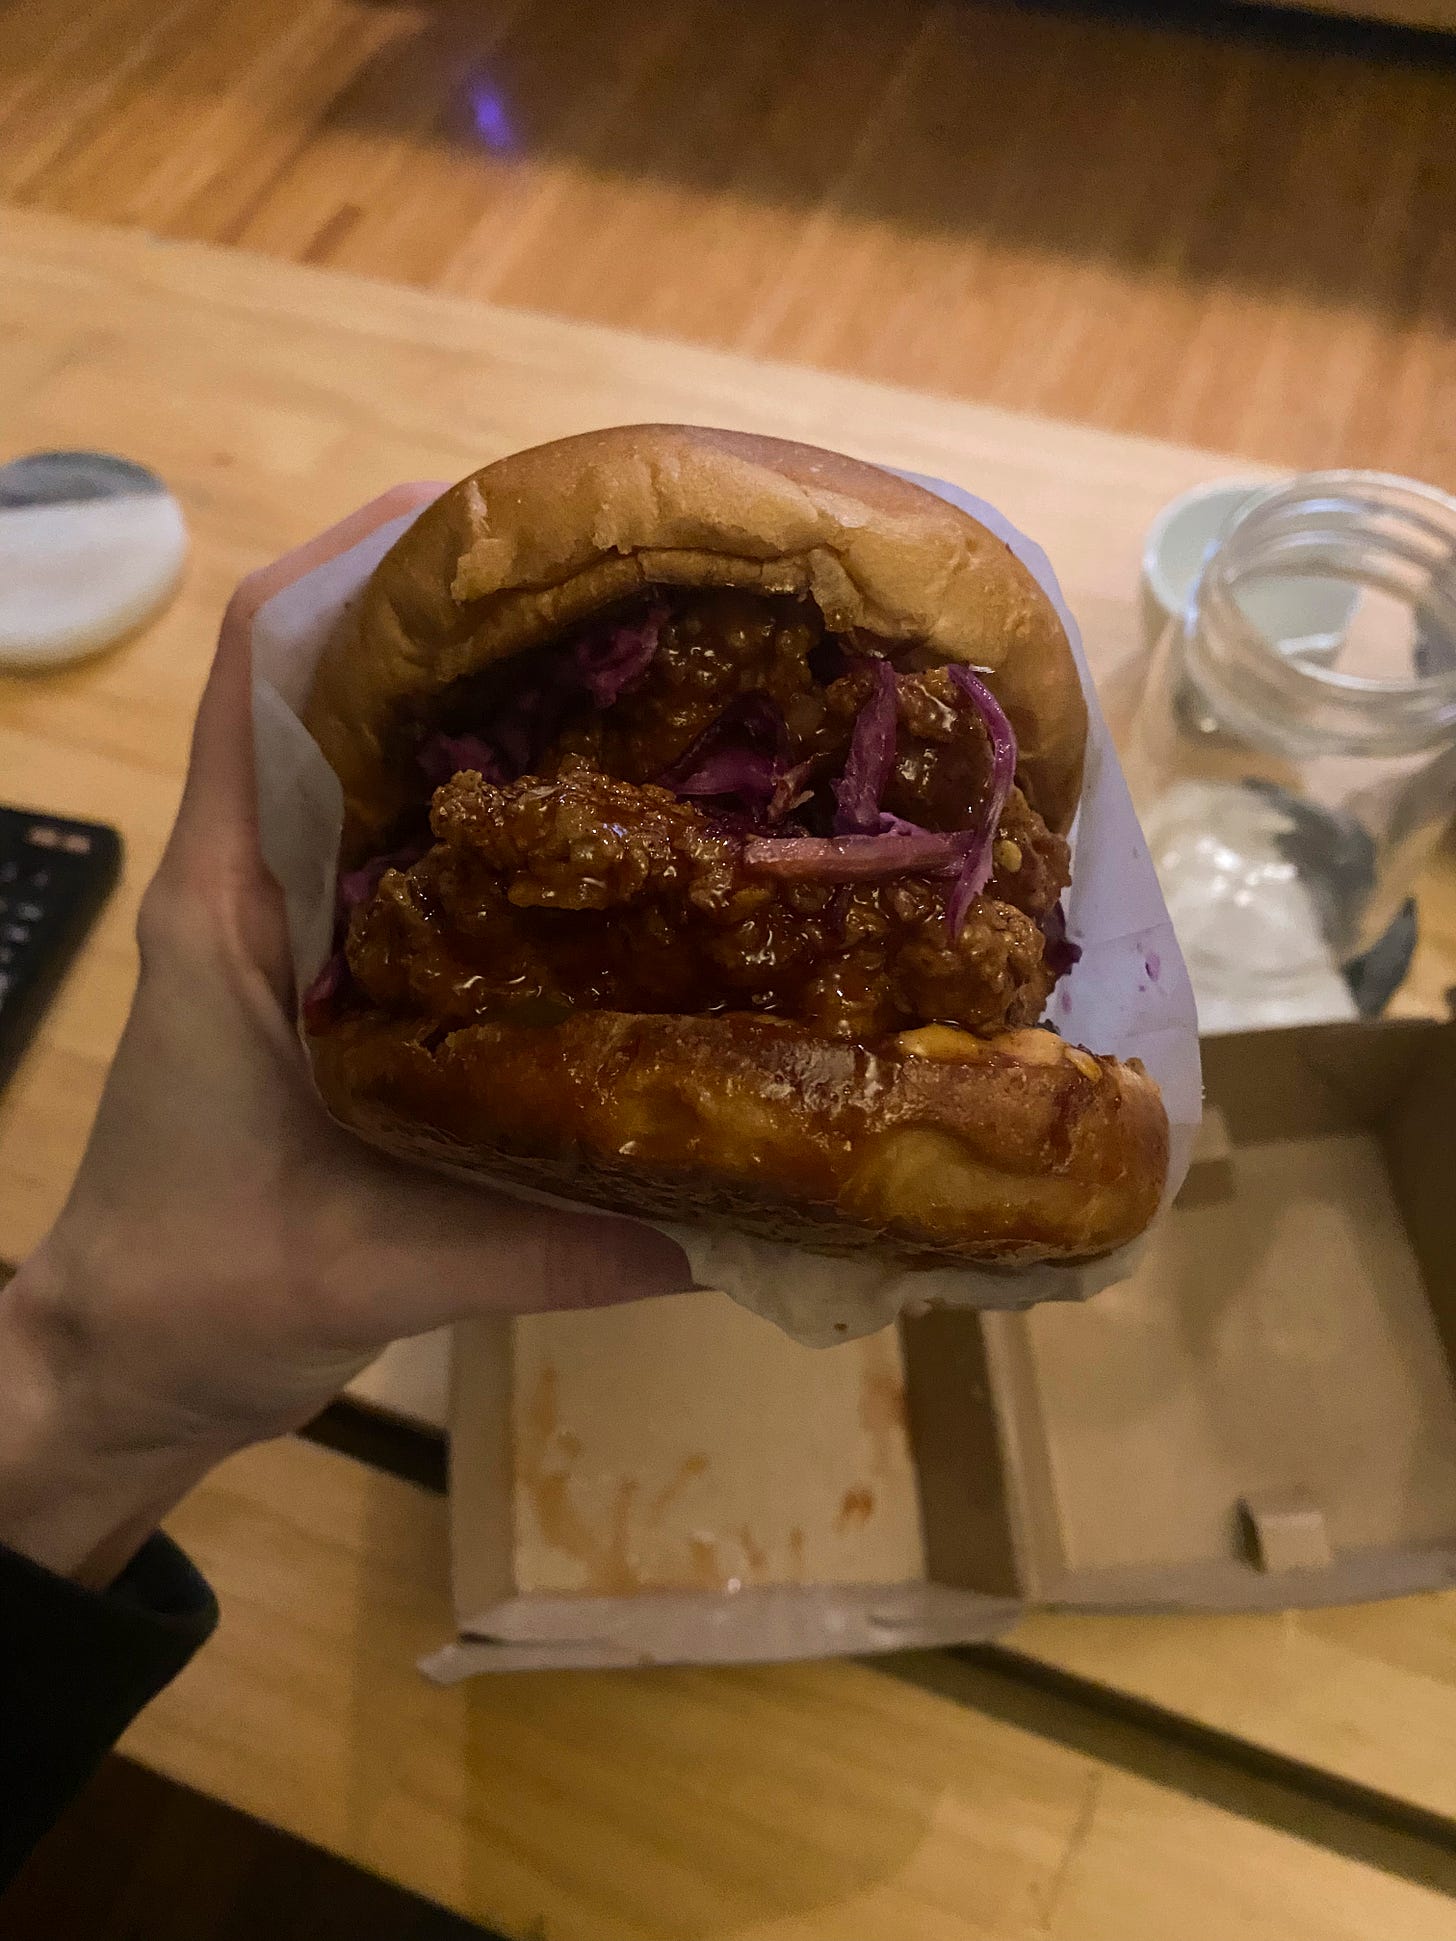 A messy-looking fried chicken sandwich in a reddish-brown sauce, with cheese and red cabbage visible at the edges. I'm holding it over top of the paper box it came on, which is sitting on the coffee table next to an empty glass on a coaster.